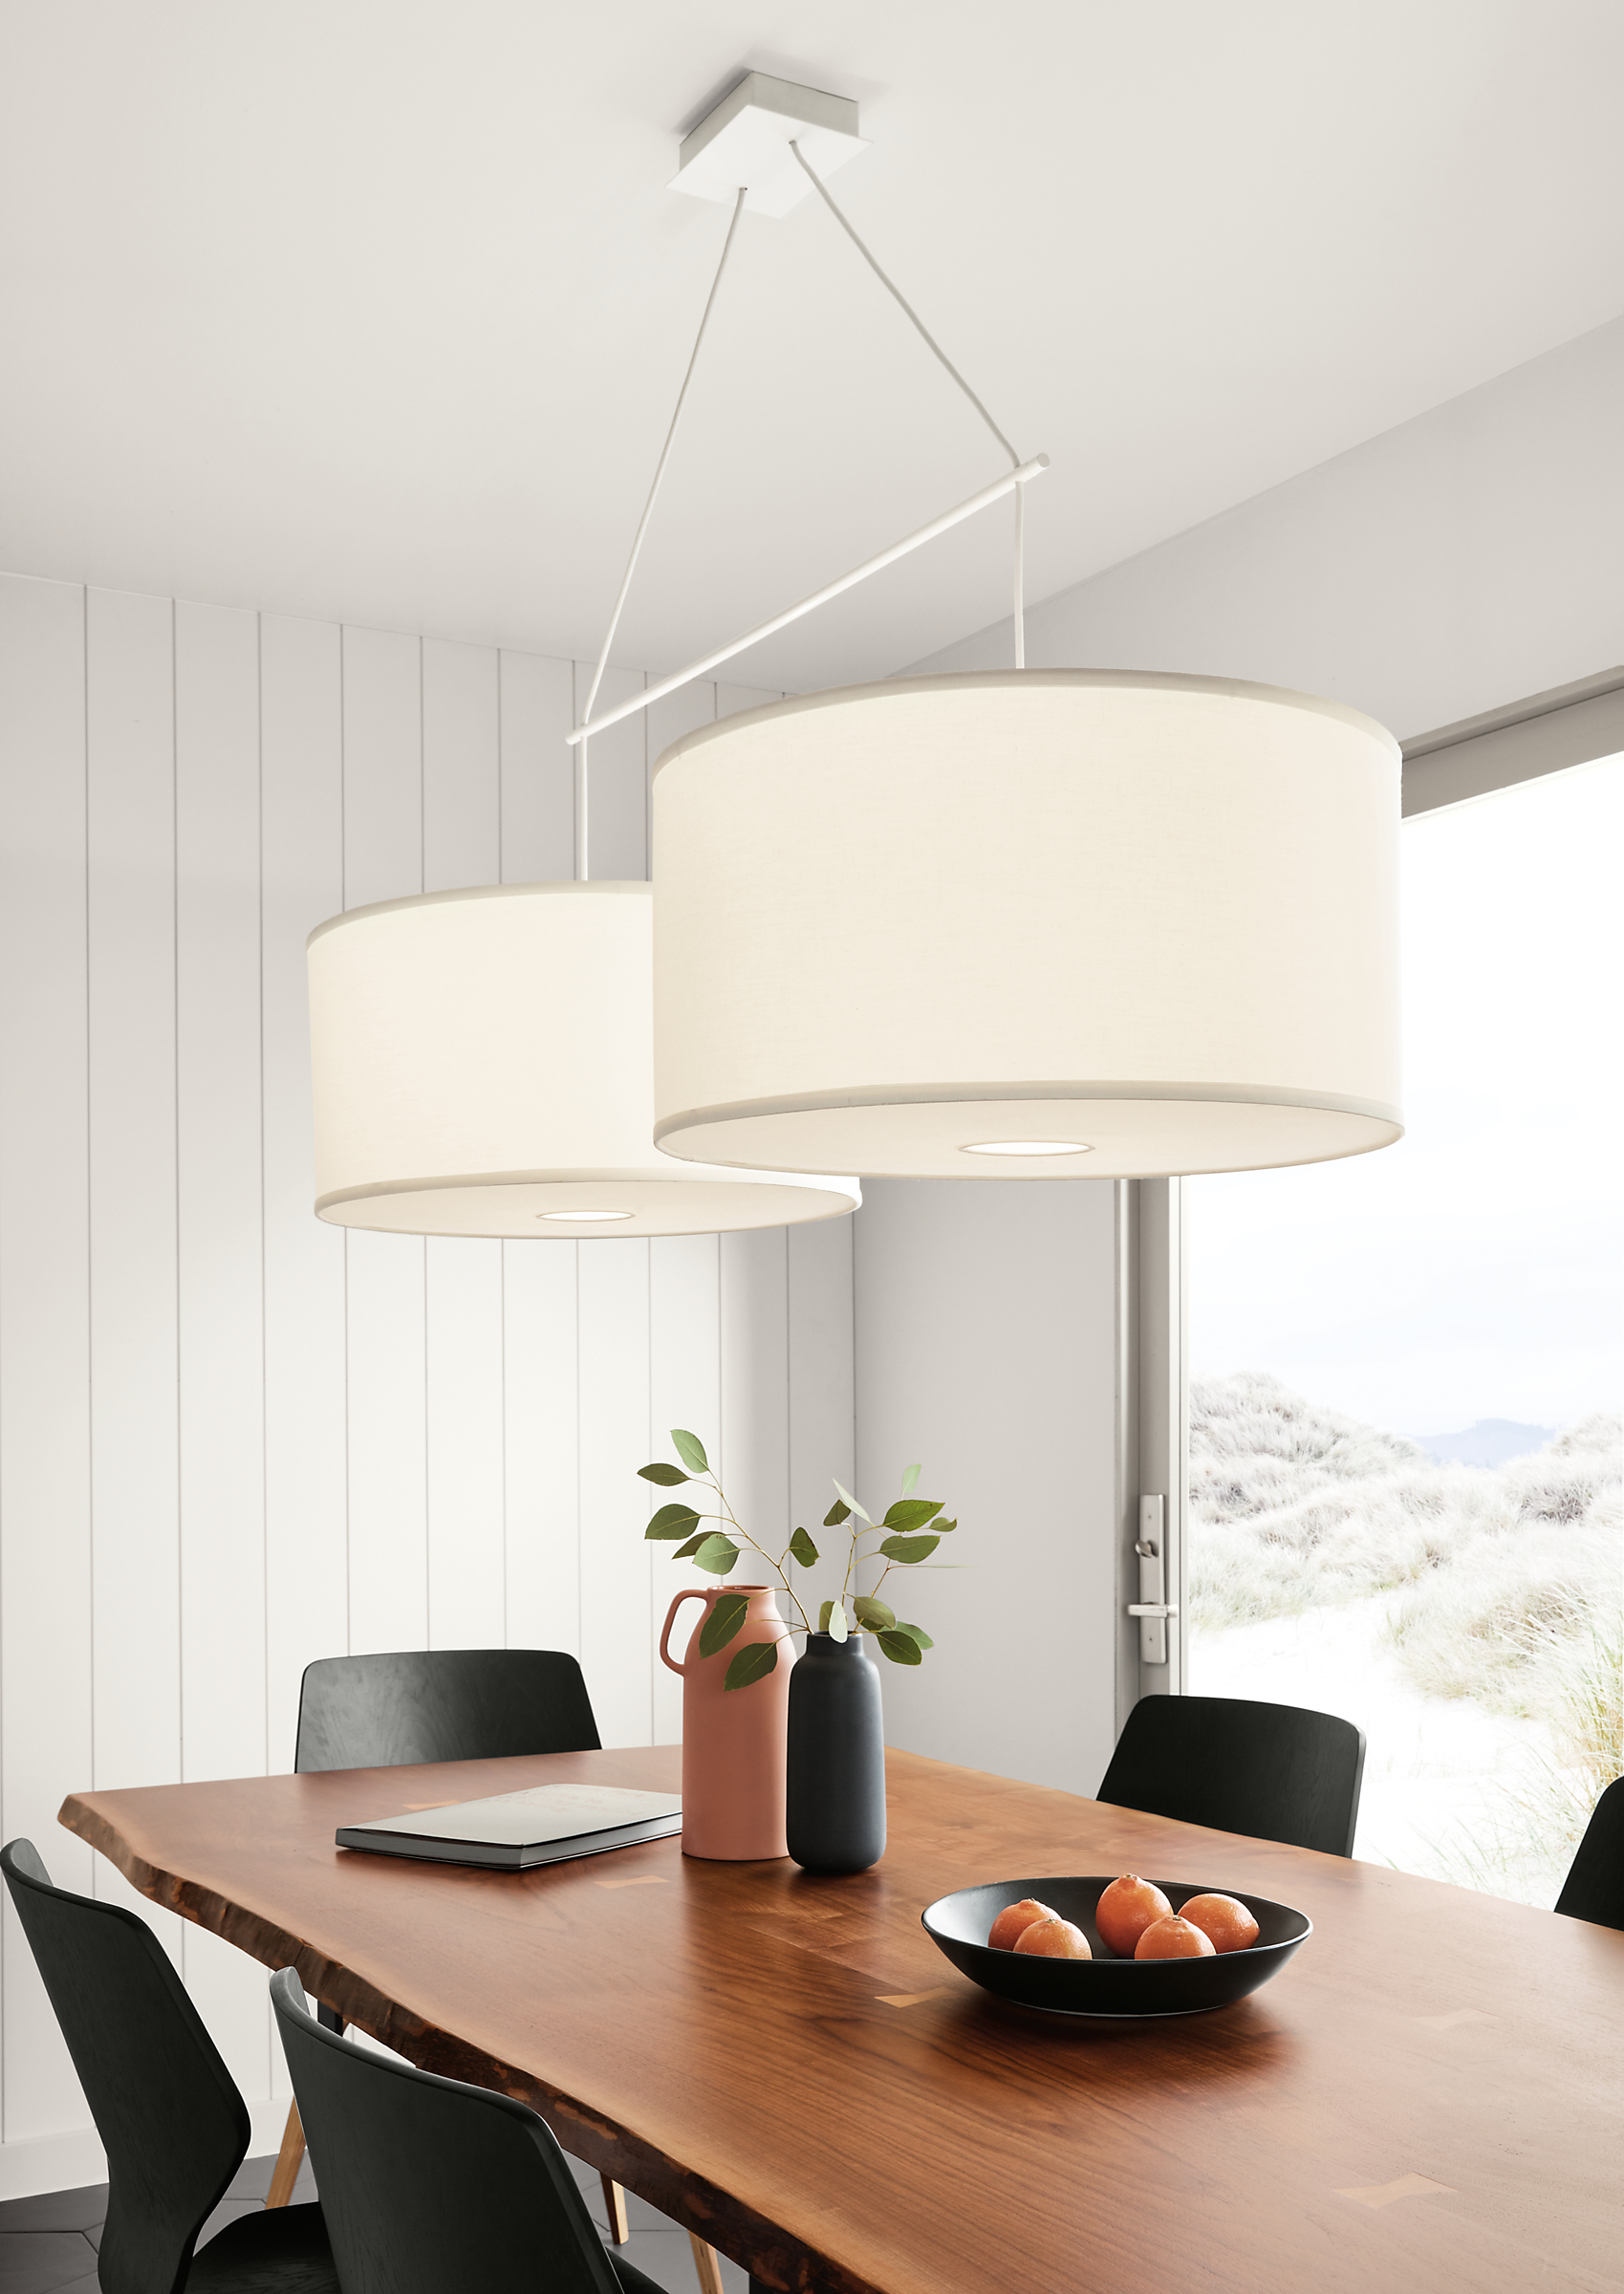 Detail of Studio round double pendant fixture with ivory white shades.